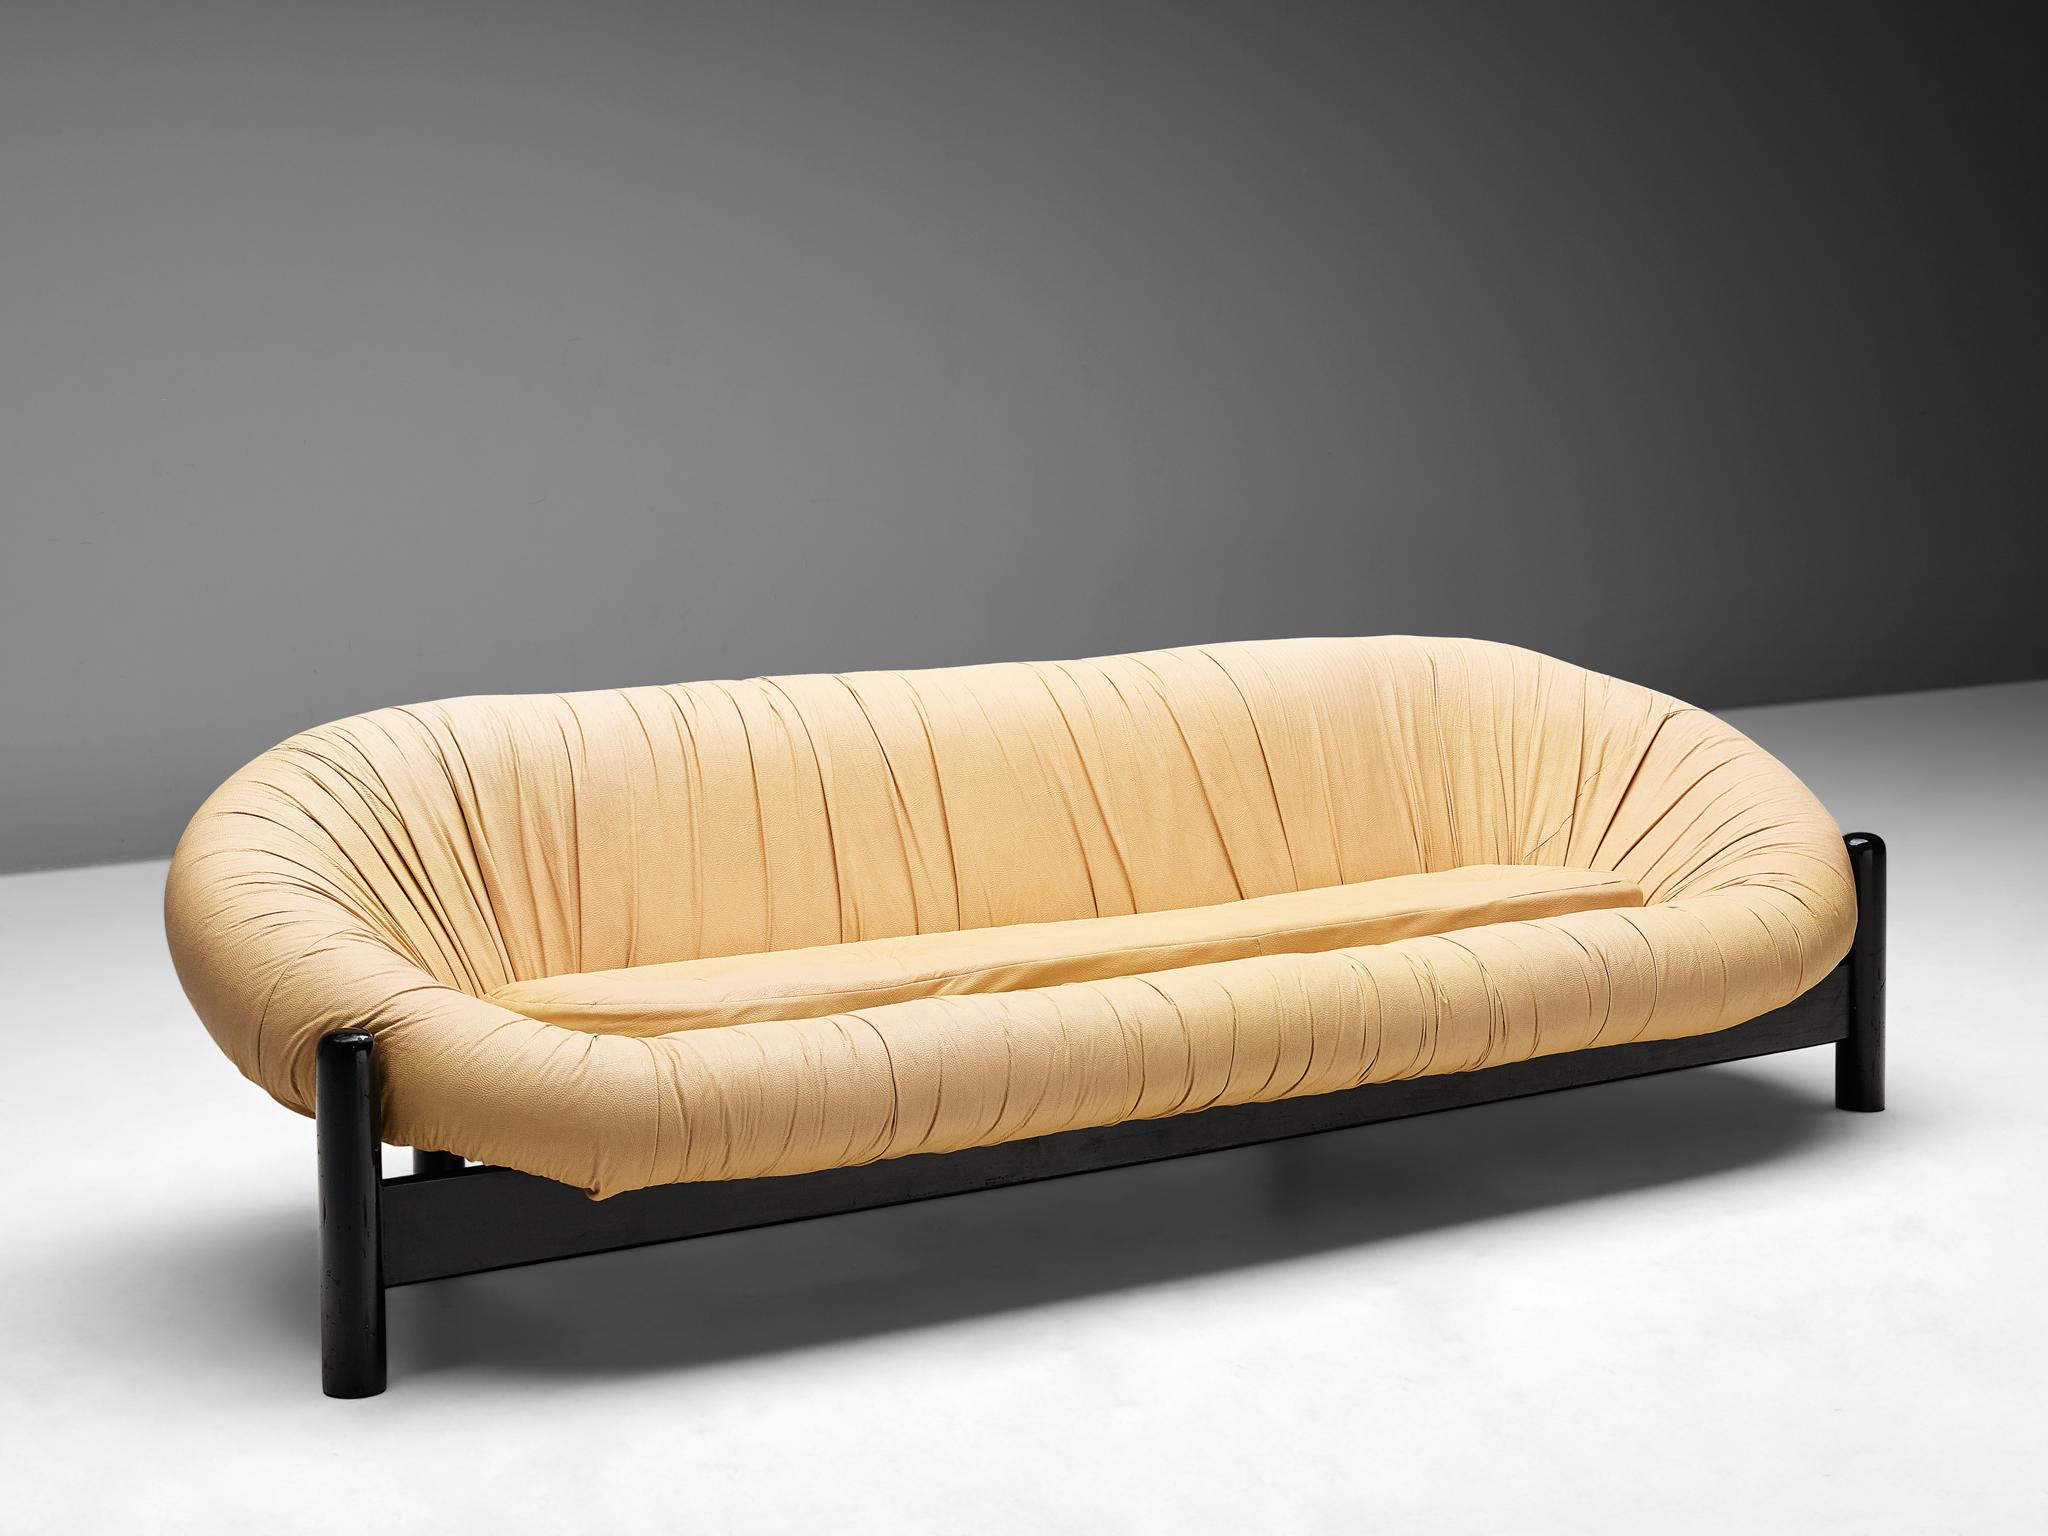 Sofa, lacquered wood and leatherette, Brazil, 1970s.

This sofa consists of a shell and seat made out of one piece, covered with light yellow fabric upholstery. The nest sofa rests on a crossed four legged base made of wood. A comfortable sofa that